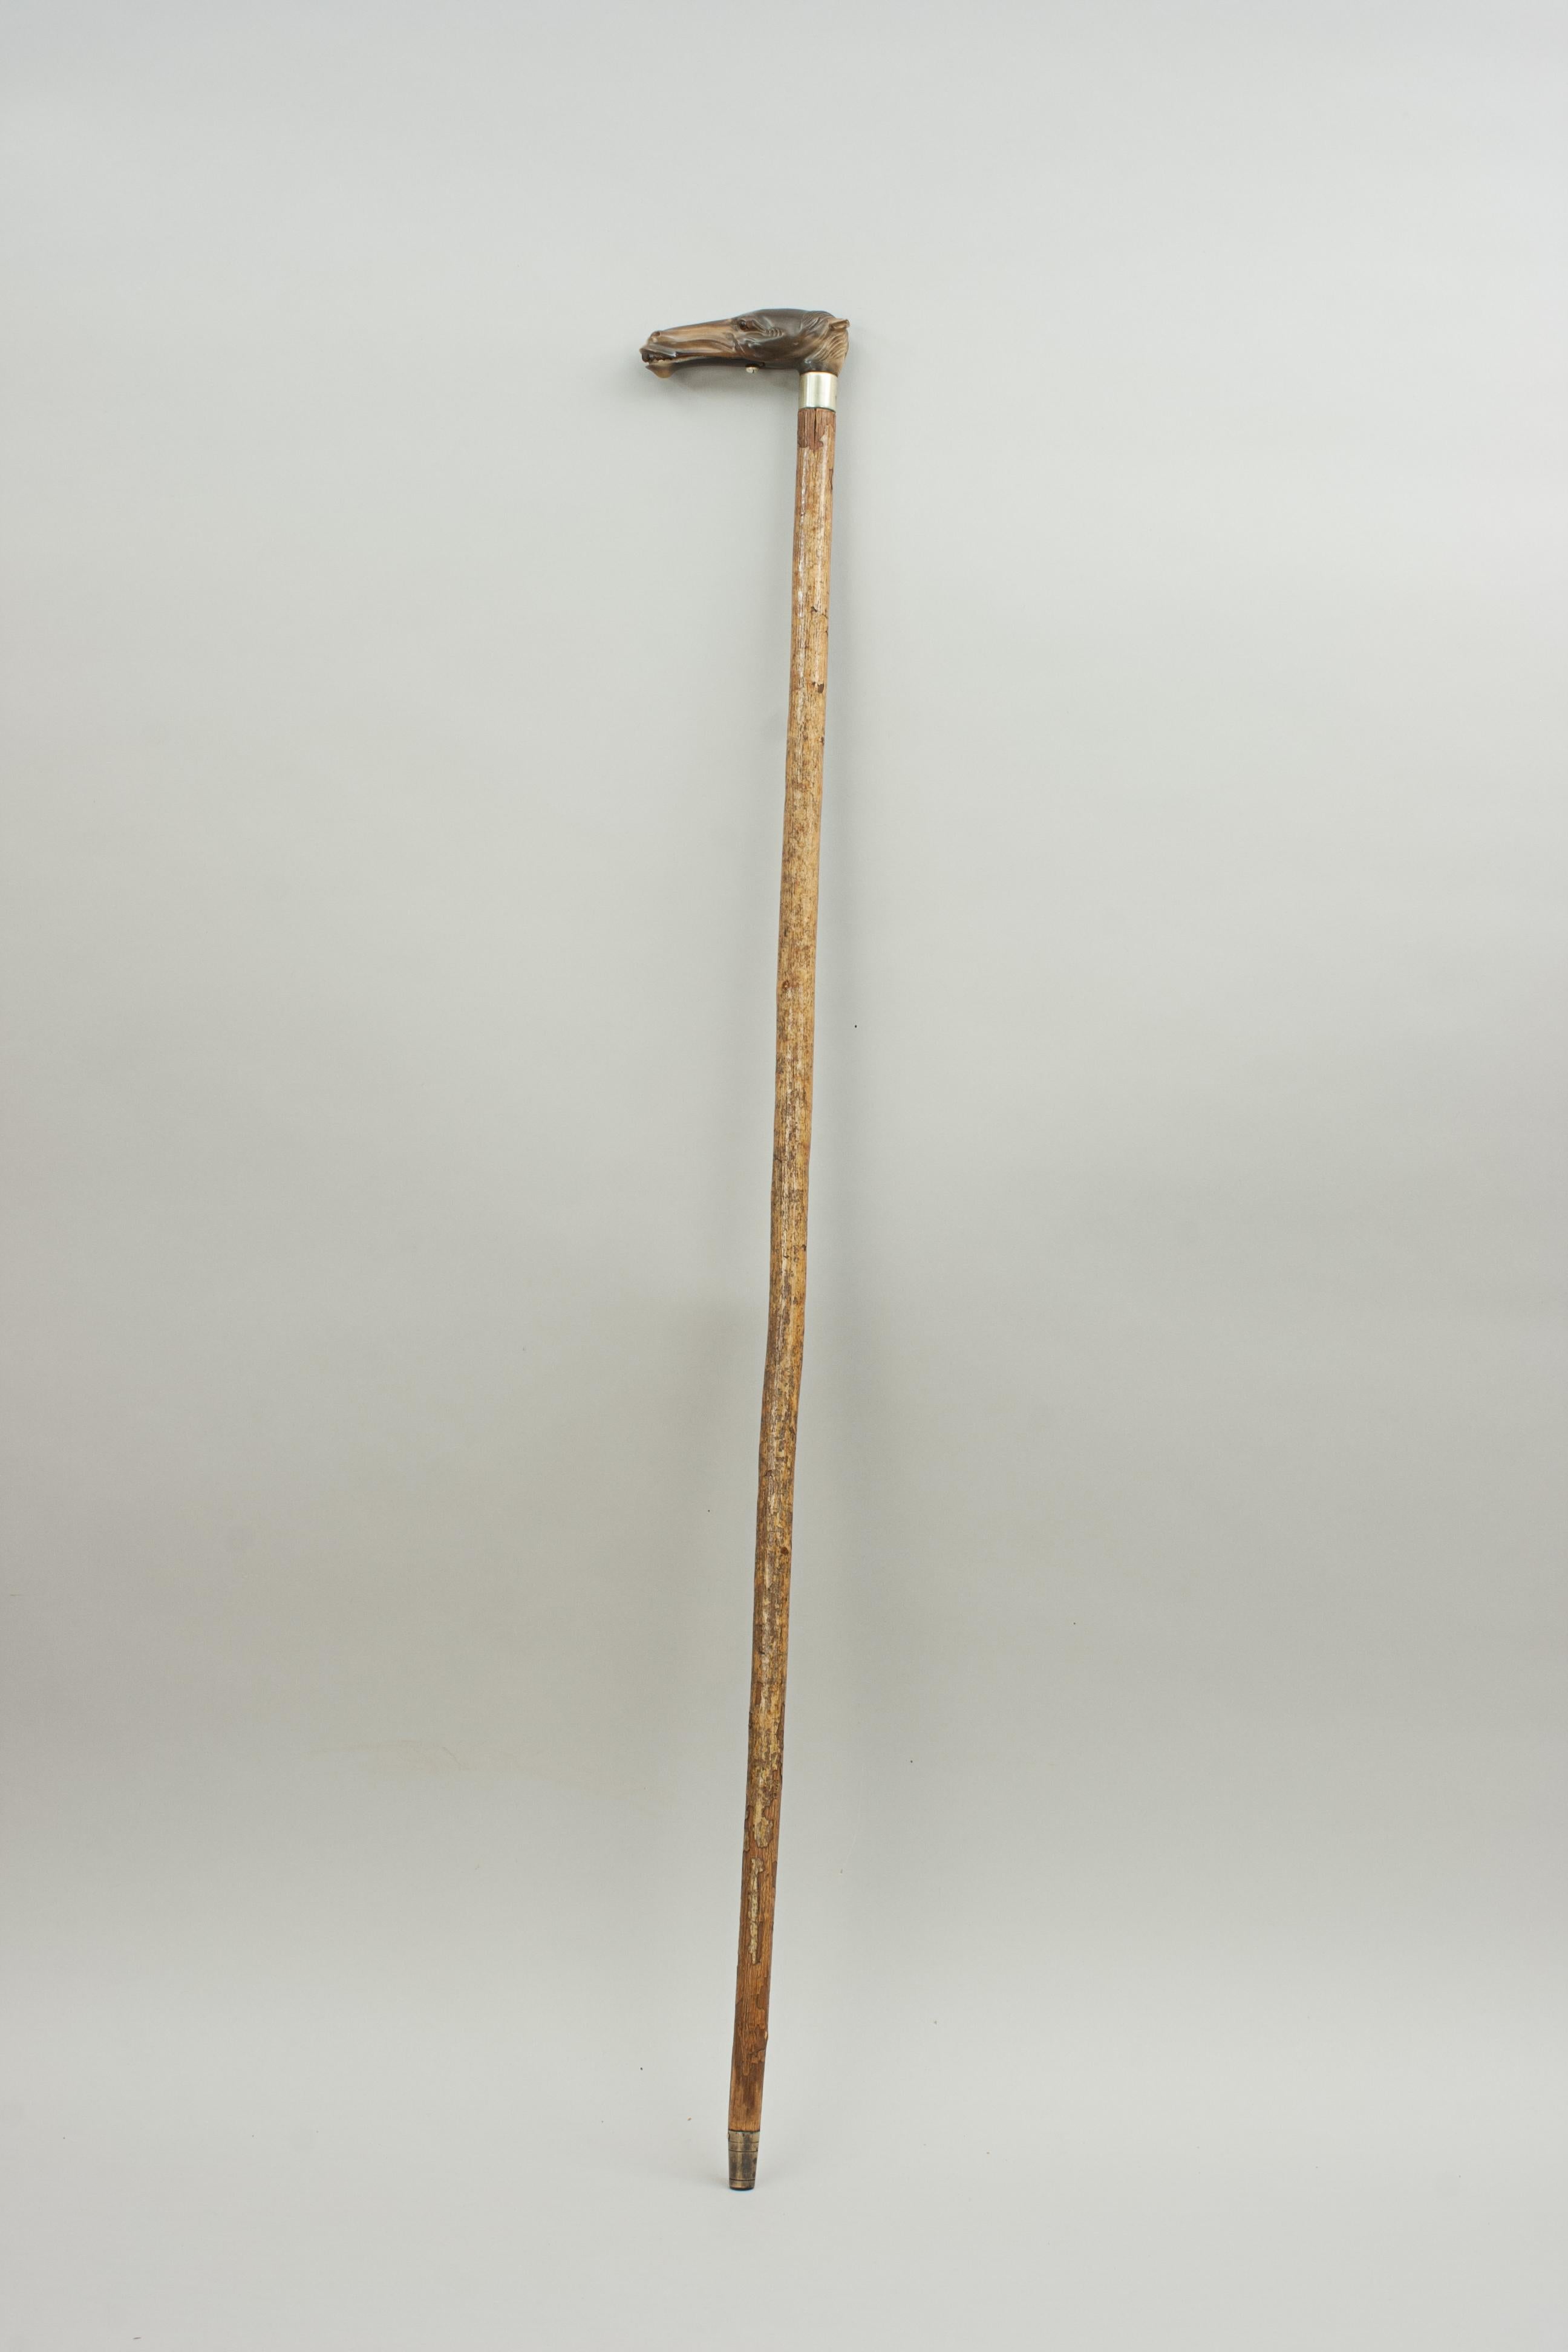 Automaton horse head walking cane.
Early 20th century walking stick with an automaton horse head glove holder. The handle is carved from Horn, finely detailed, having inset glass eyes and spring-loaded opening mouth. The head mounted on wooden